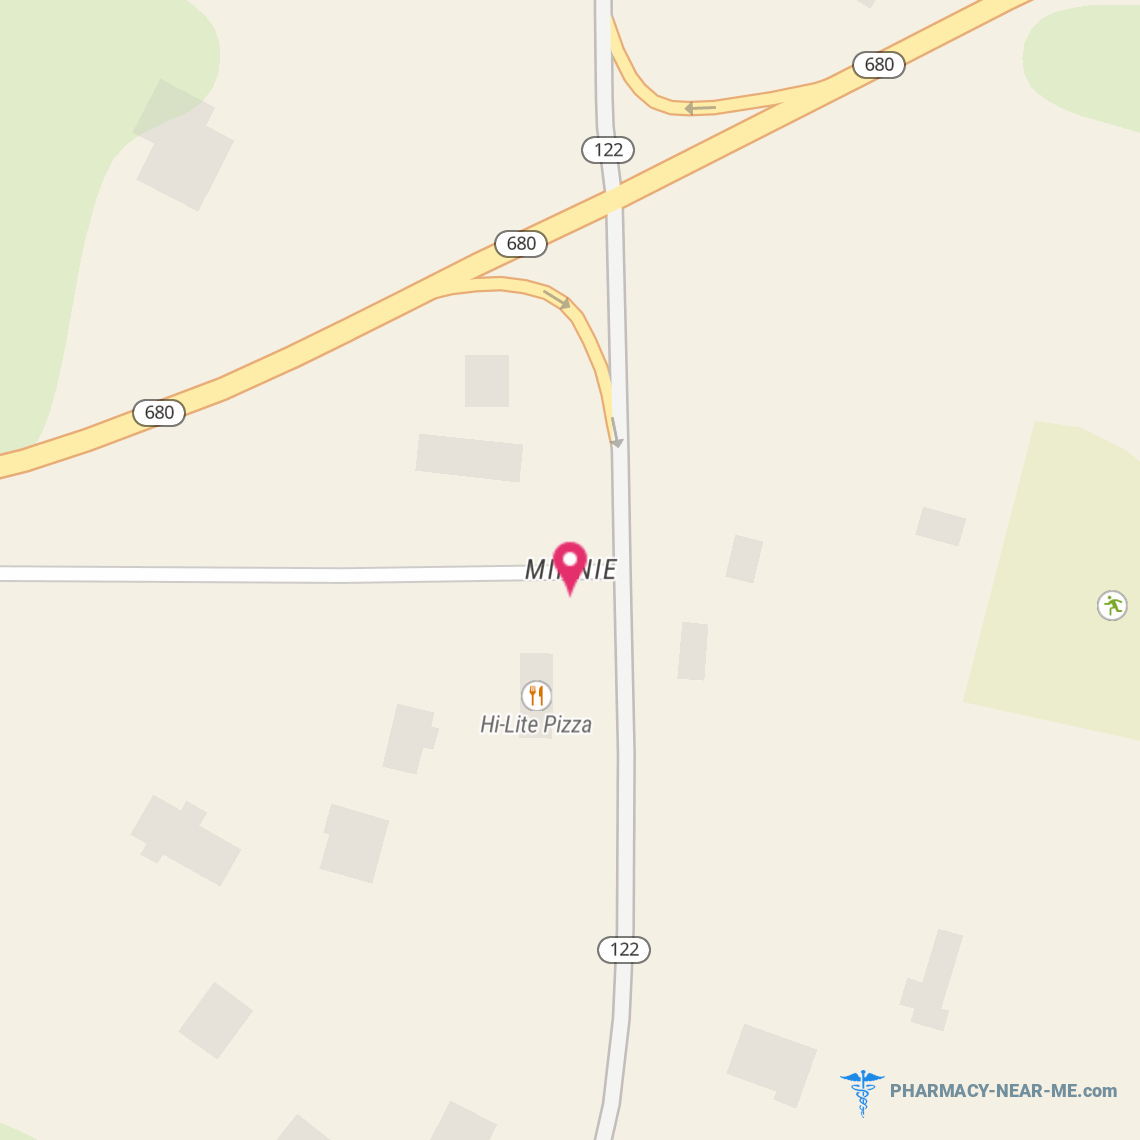 PARKVIEW PHARMACY INC - Pharmacy Hours, Phone, Reviews & Information: Minnie, Kentucky 41651, United States